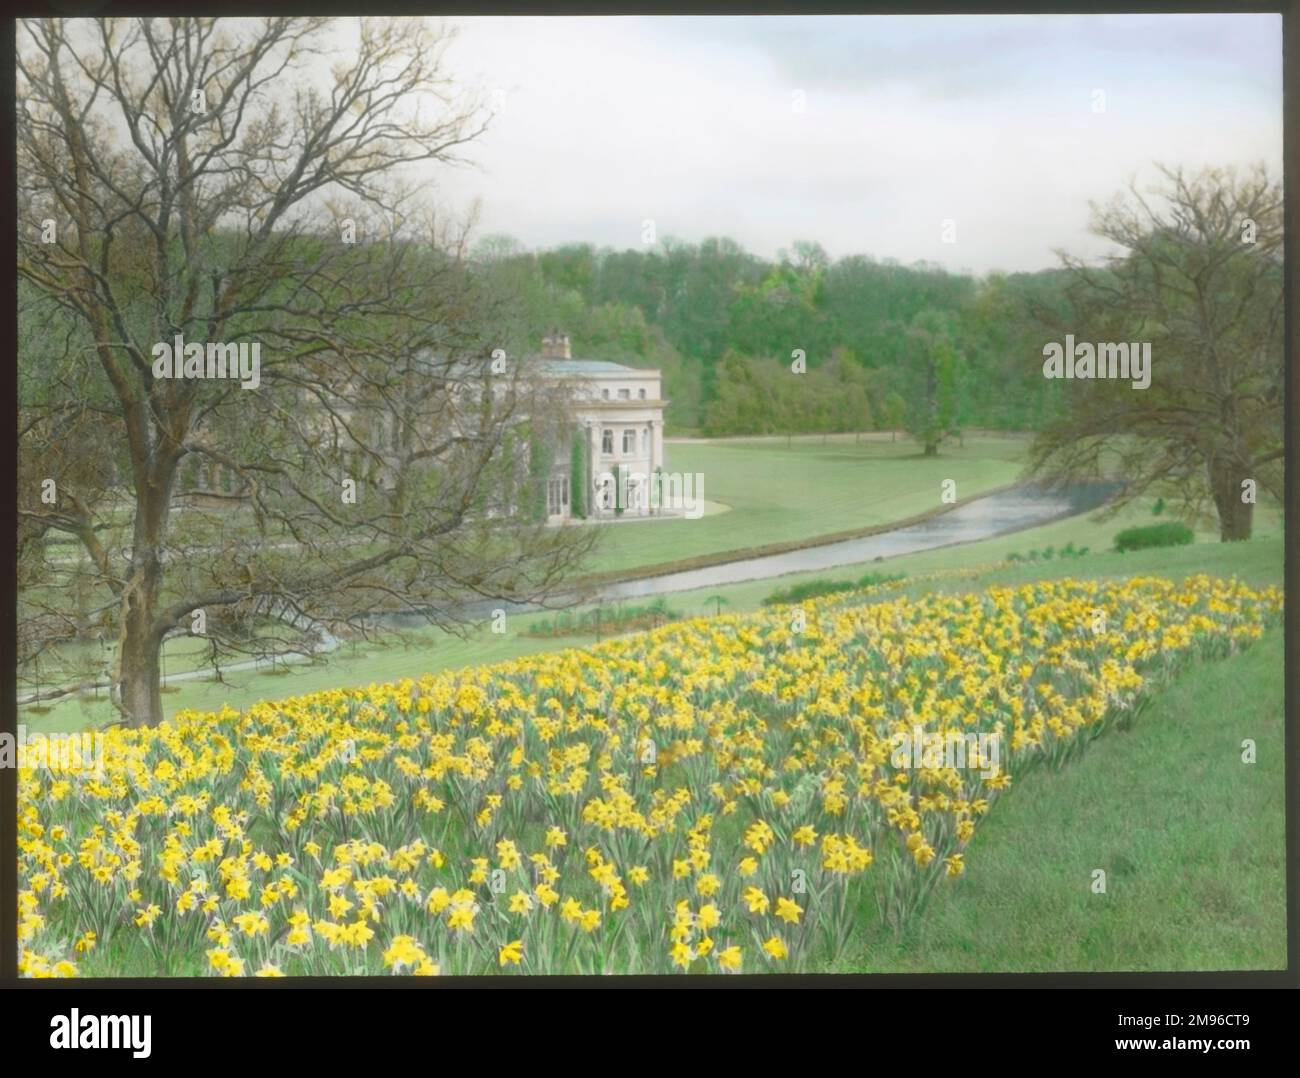 View of Tewin Water House and Tewin Water, at Digswell, Hertfordshire, with a host of golden daffodils in the foreground.  The house was built in the 17th century, and the grounds and gardens were originally designed by Humphry Repton. Stock Photo